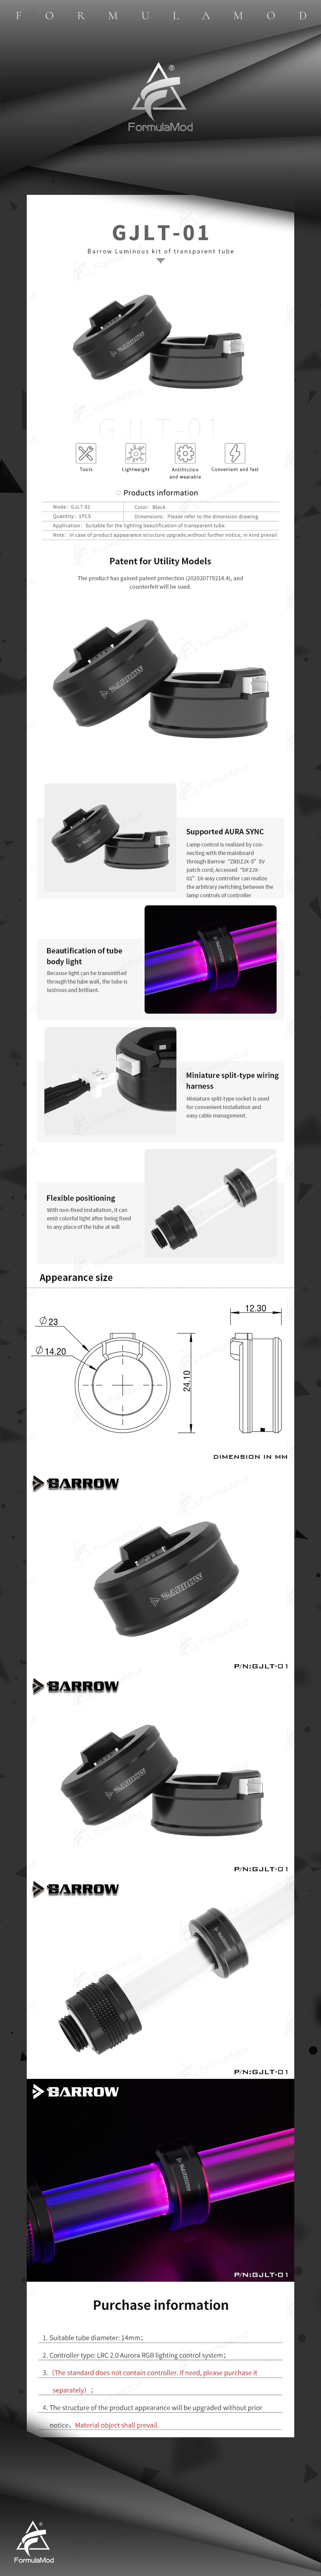 Barrow A-RGB Luminous Kit, Lighting Component Ring For OD14mm Transparent Hard Tube, Flexible Positioning Water Cooling Decoration Tool, GJLT-01  